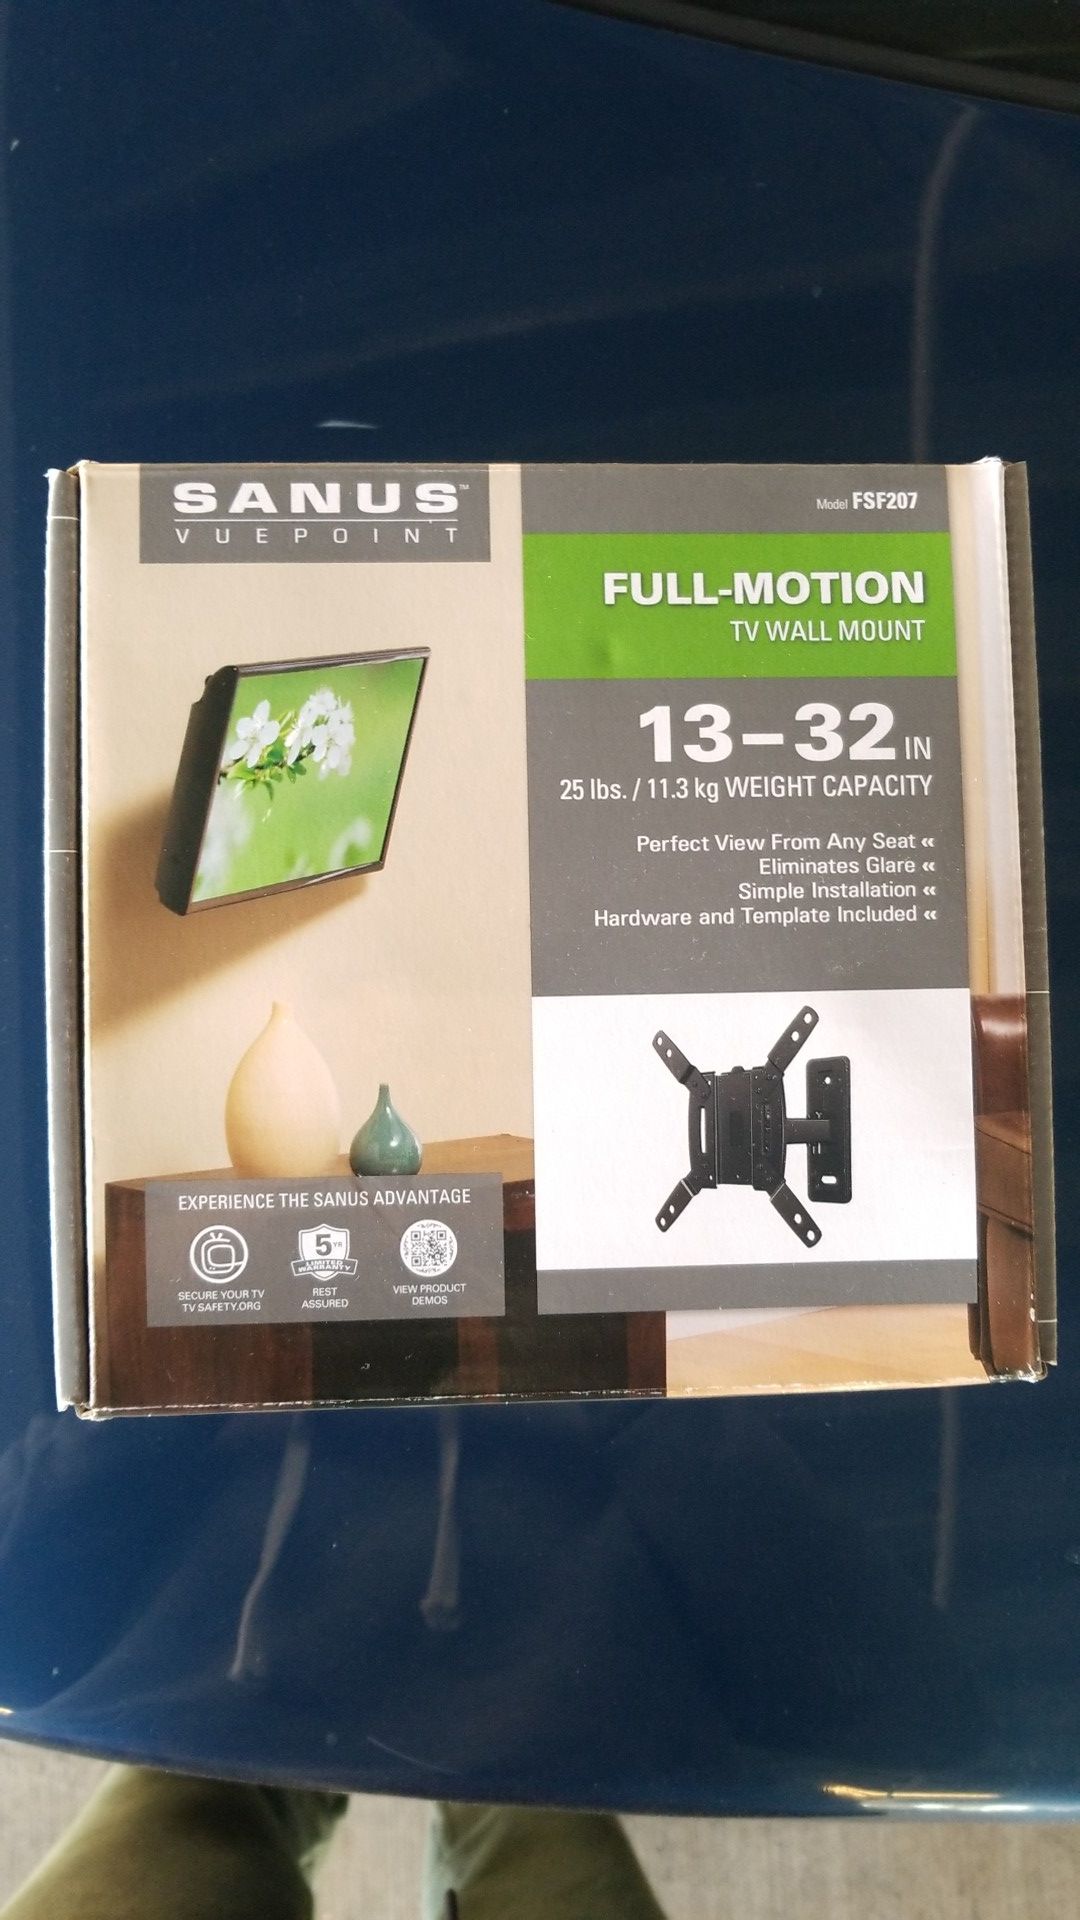 Sanus Vuepoint full motion TV wall mount 13-32 inches